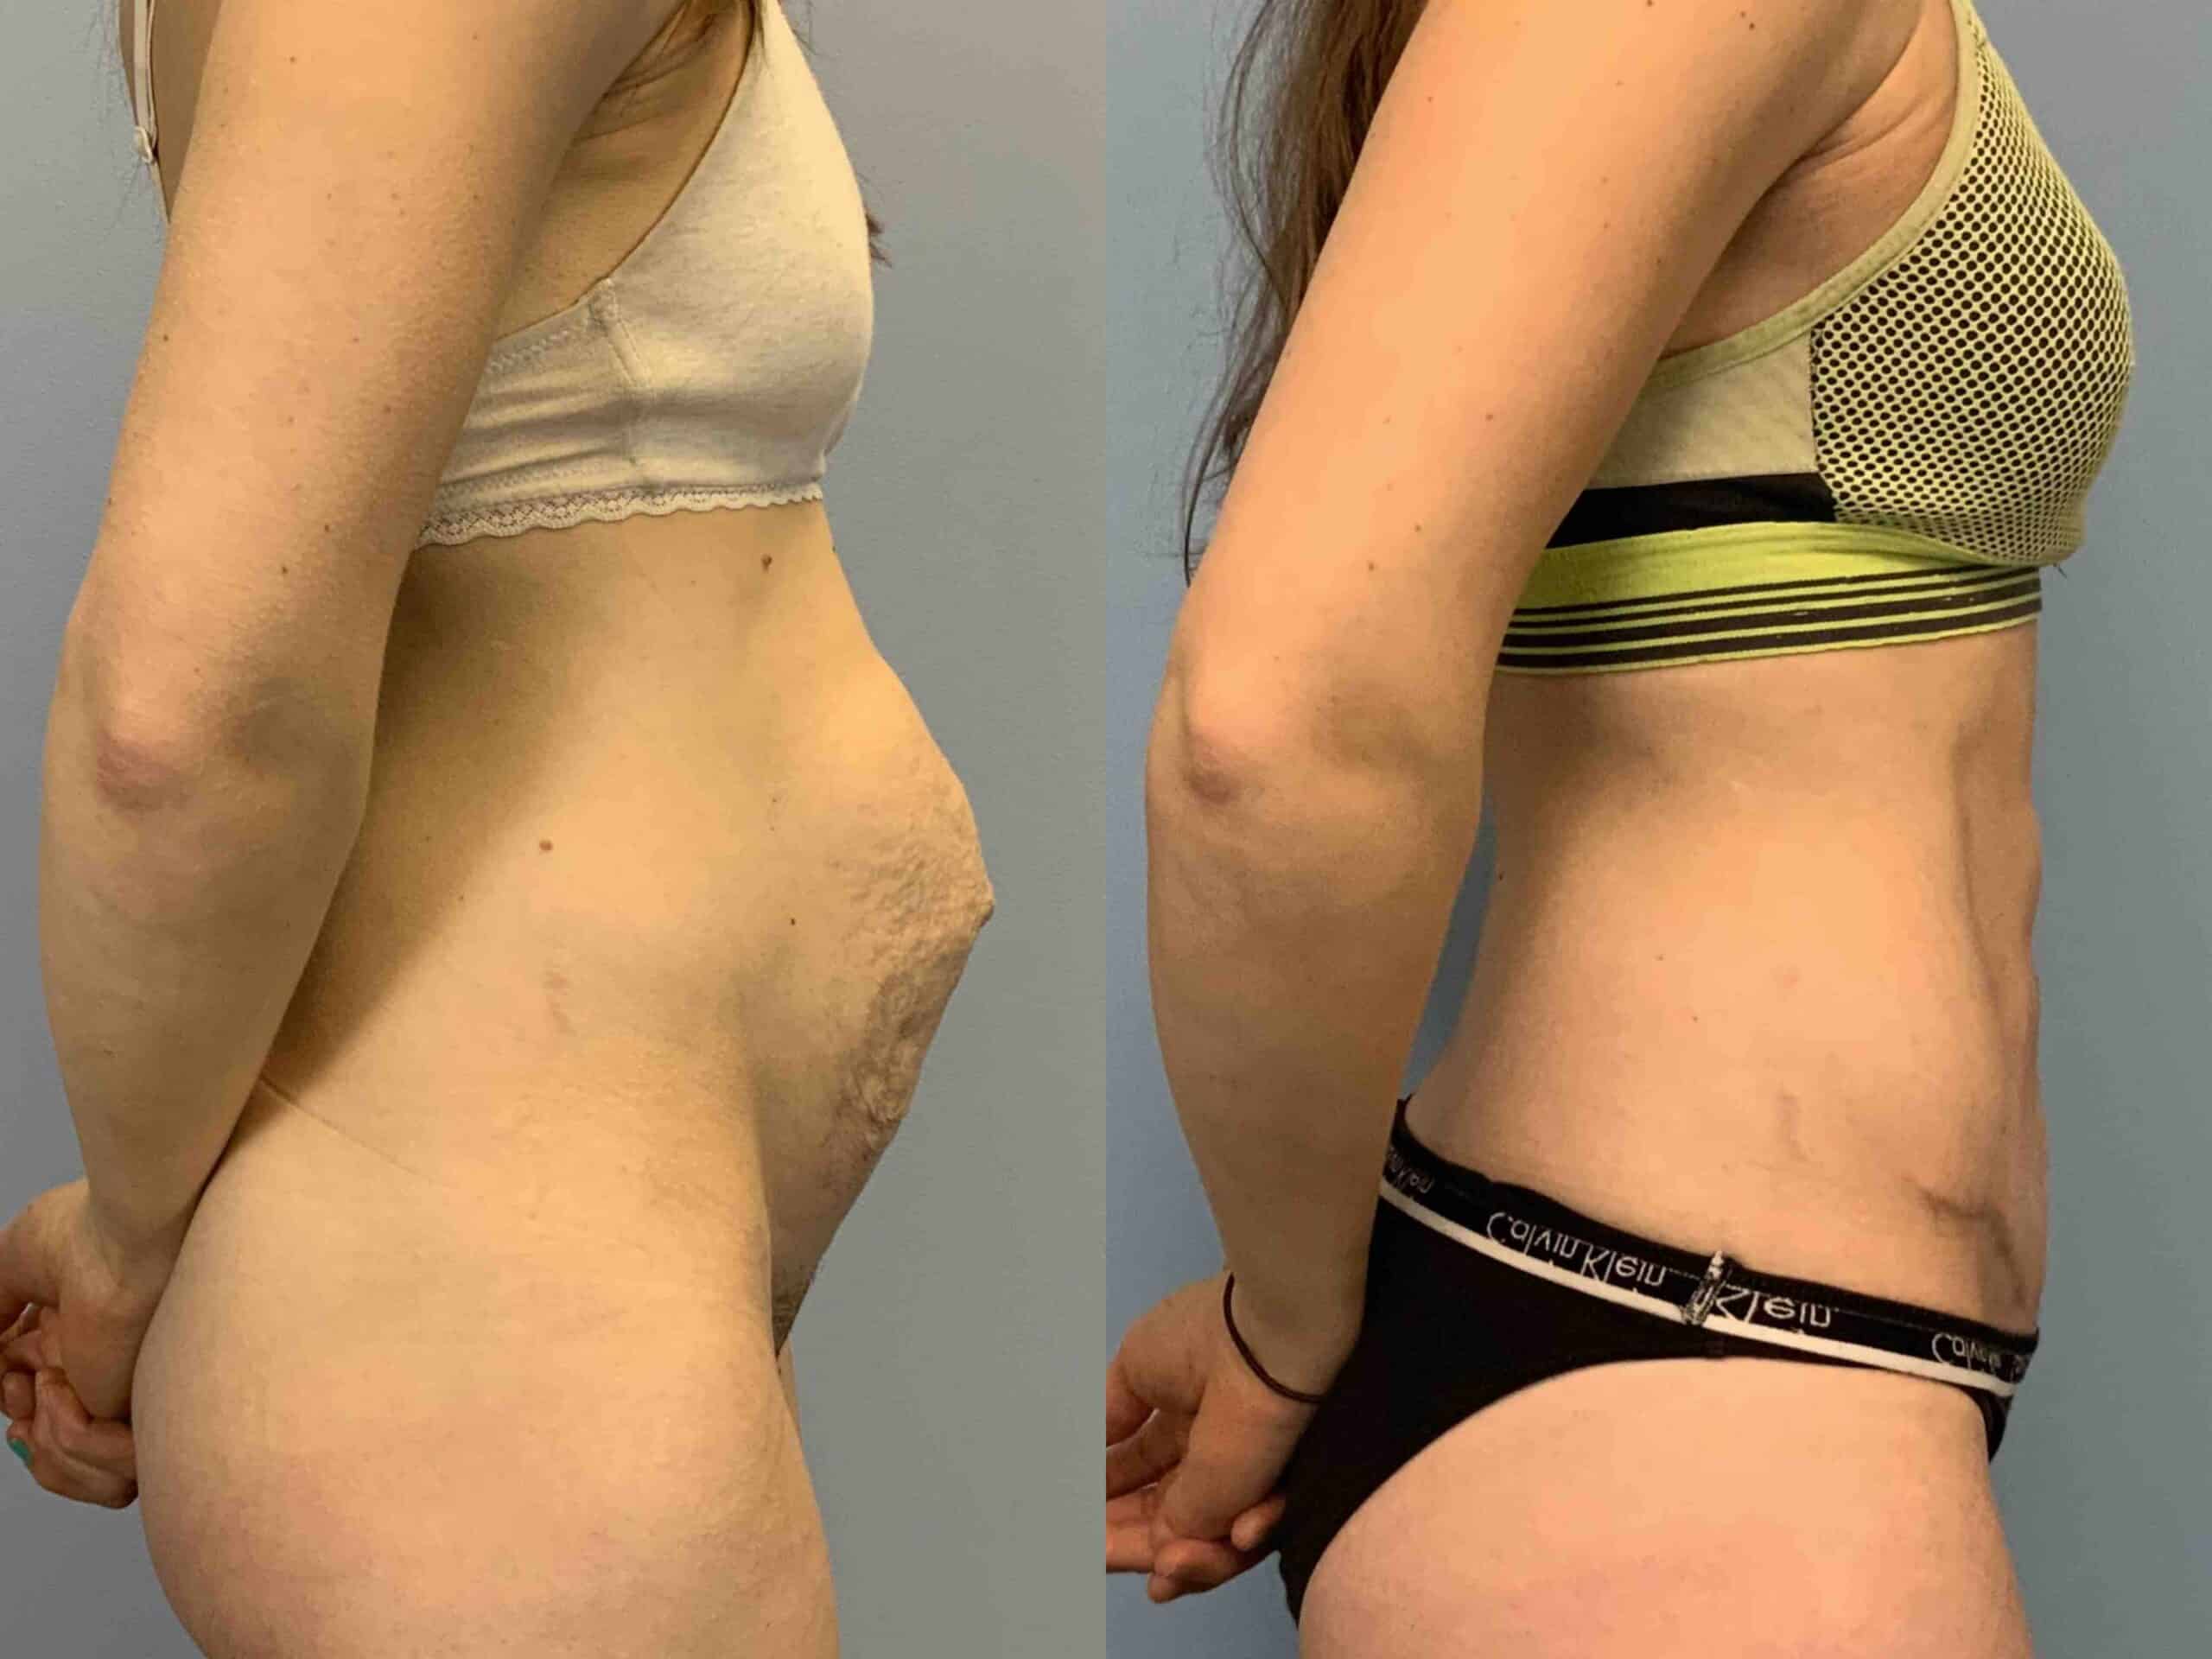 Before and after, 6 mo post op from Abdominoplasty, Hernia Repair Surgery performed by Dr. Paul Vanek (side view)